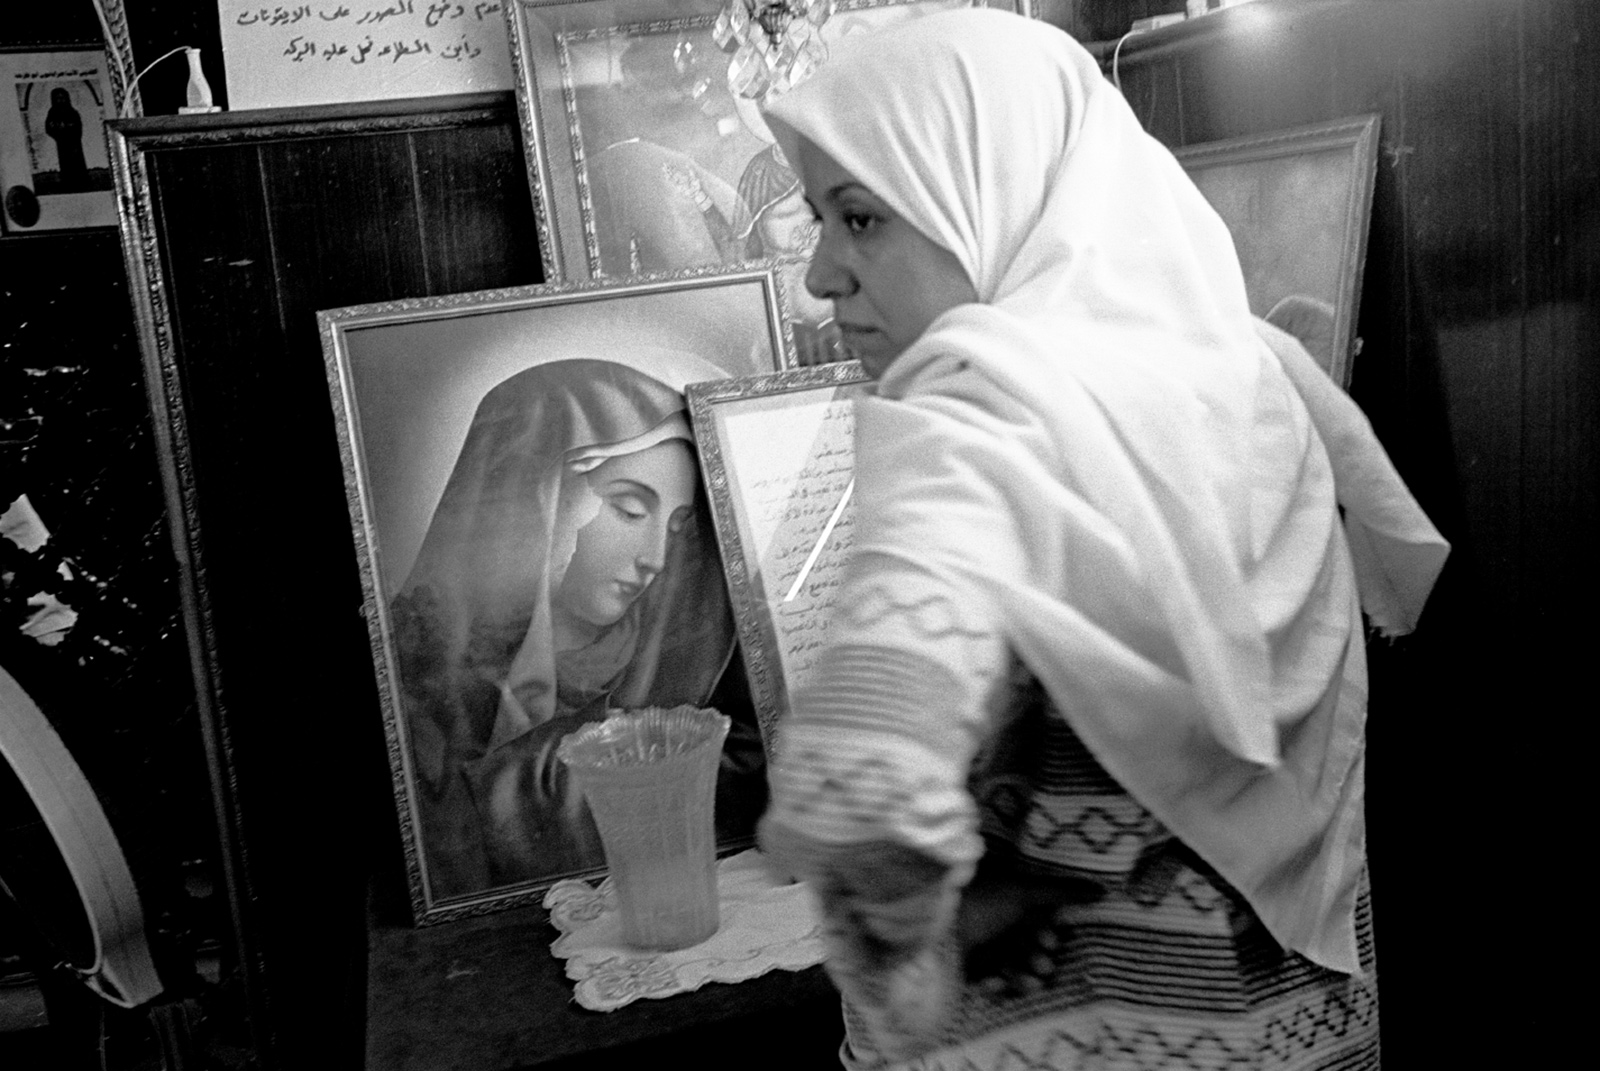 A Muslim woman asking for protection from black magic inside the shrine of Abba Ruwais, a Copt saint, Cairo, Egypt, 1997